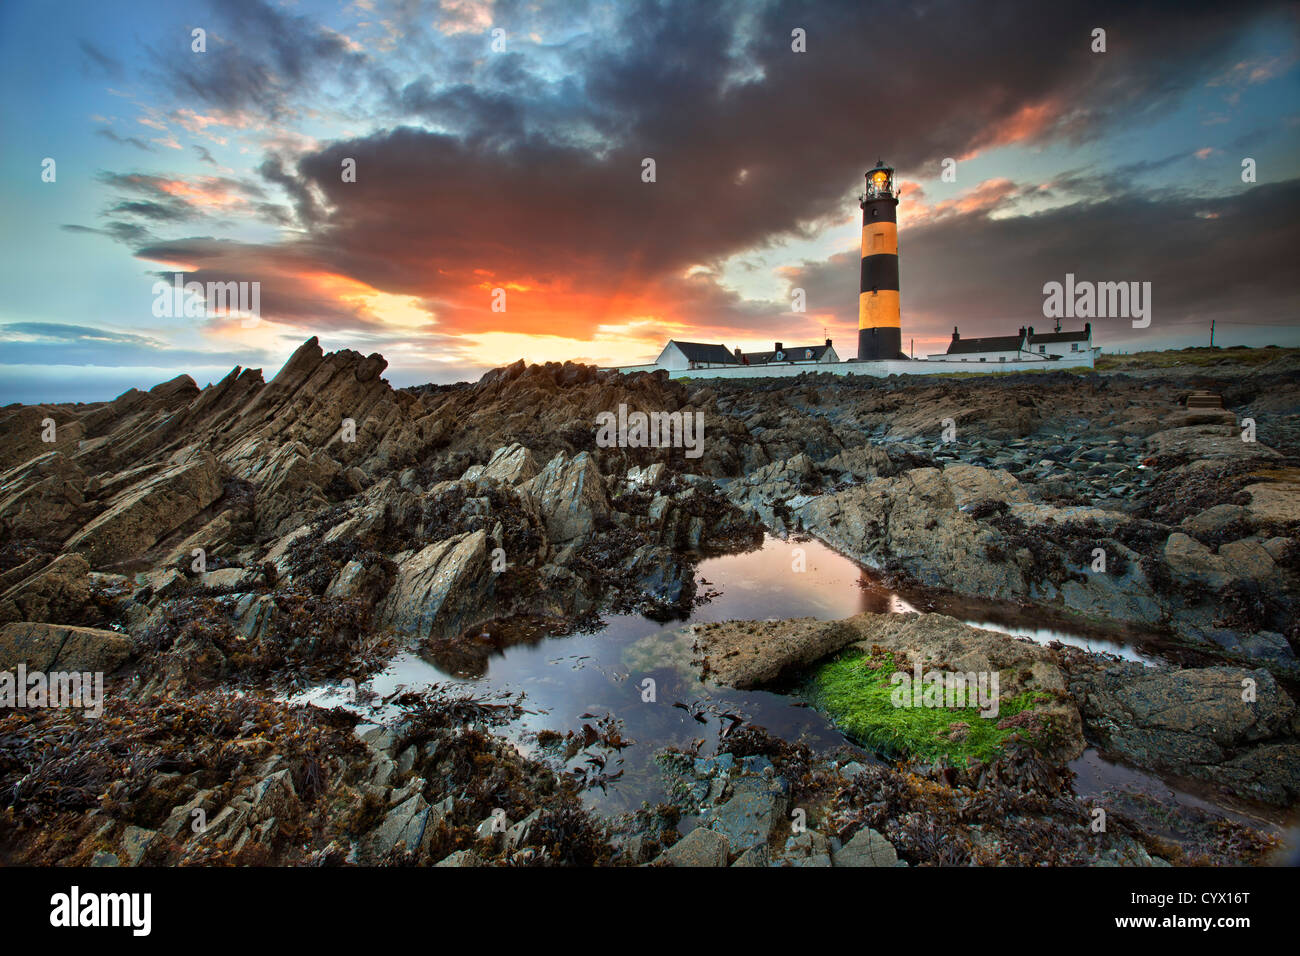 St Johns lighthouse in county Down at sunset. Stock Photo